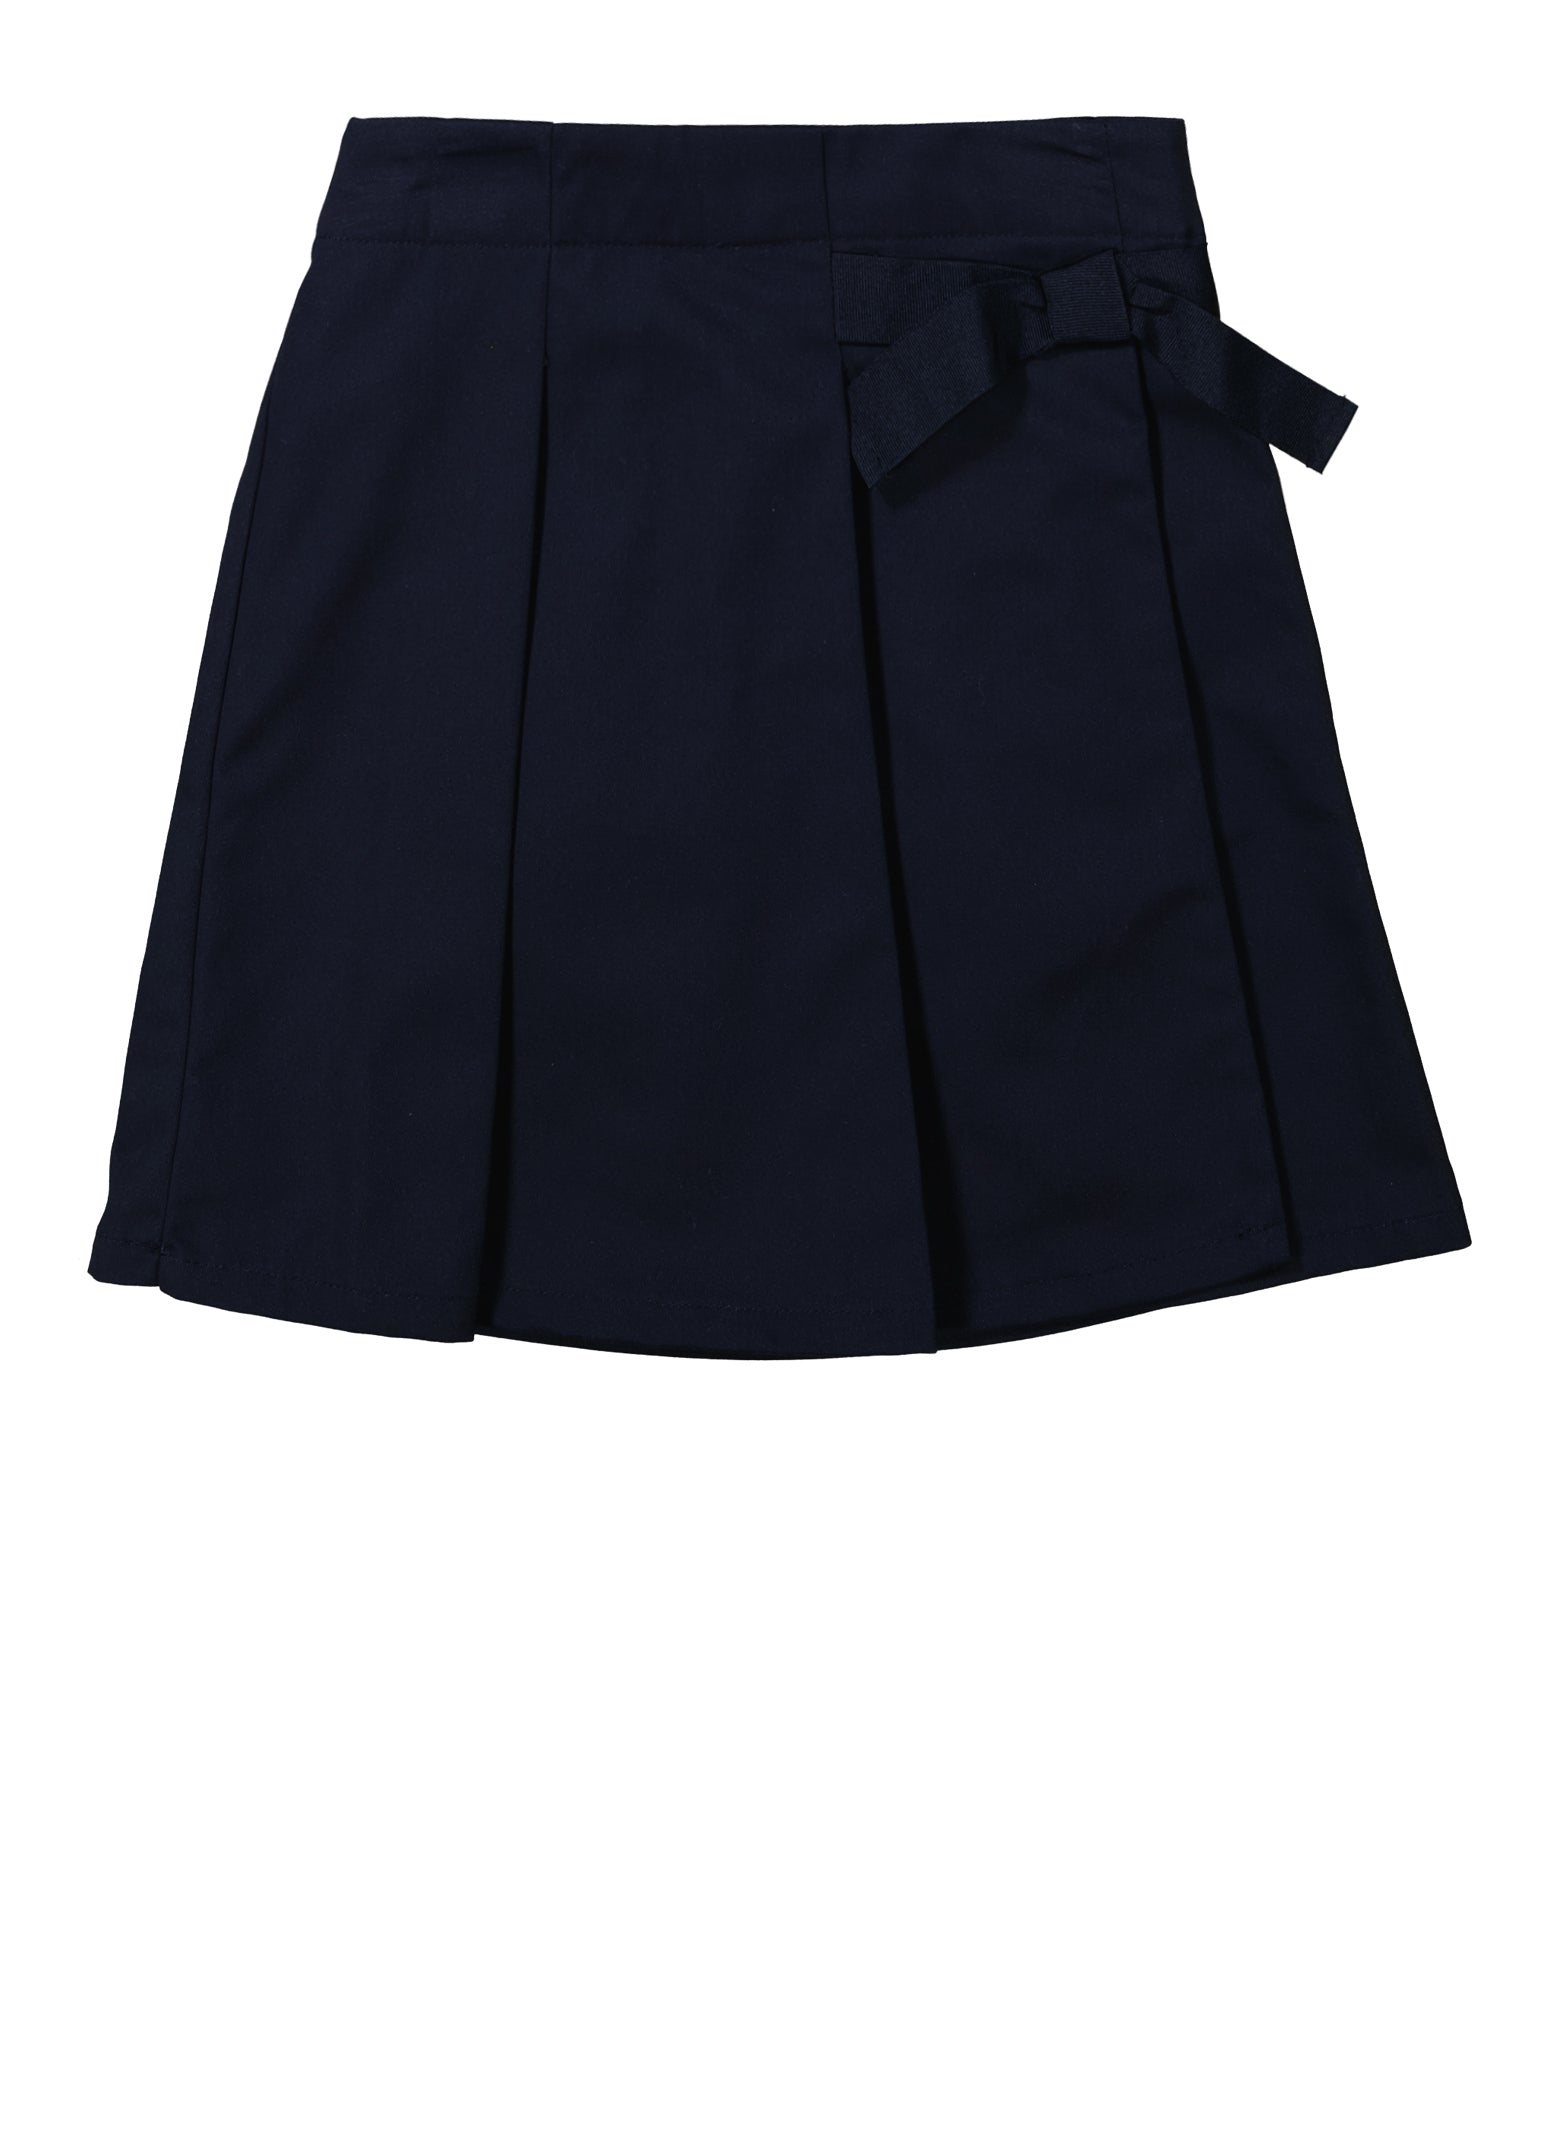 French Toast Girls 7-16 Ribbon Detail Pleated Skort, Blue, Size 7